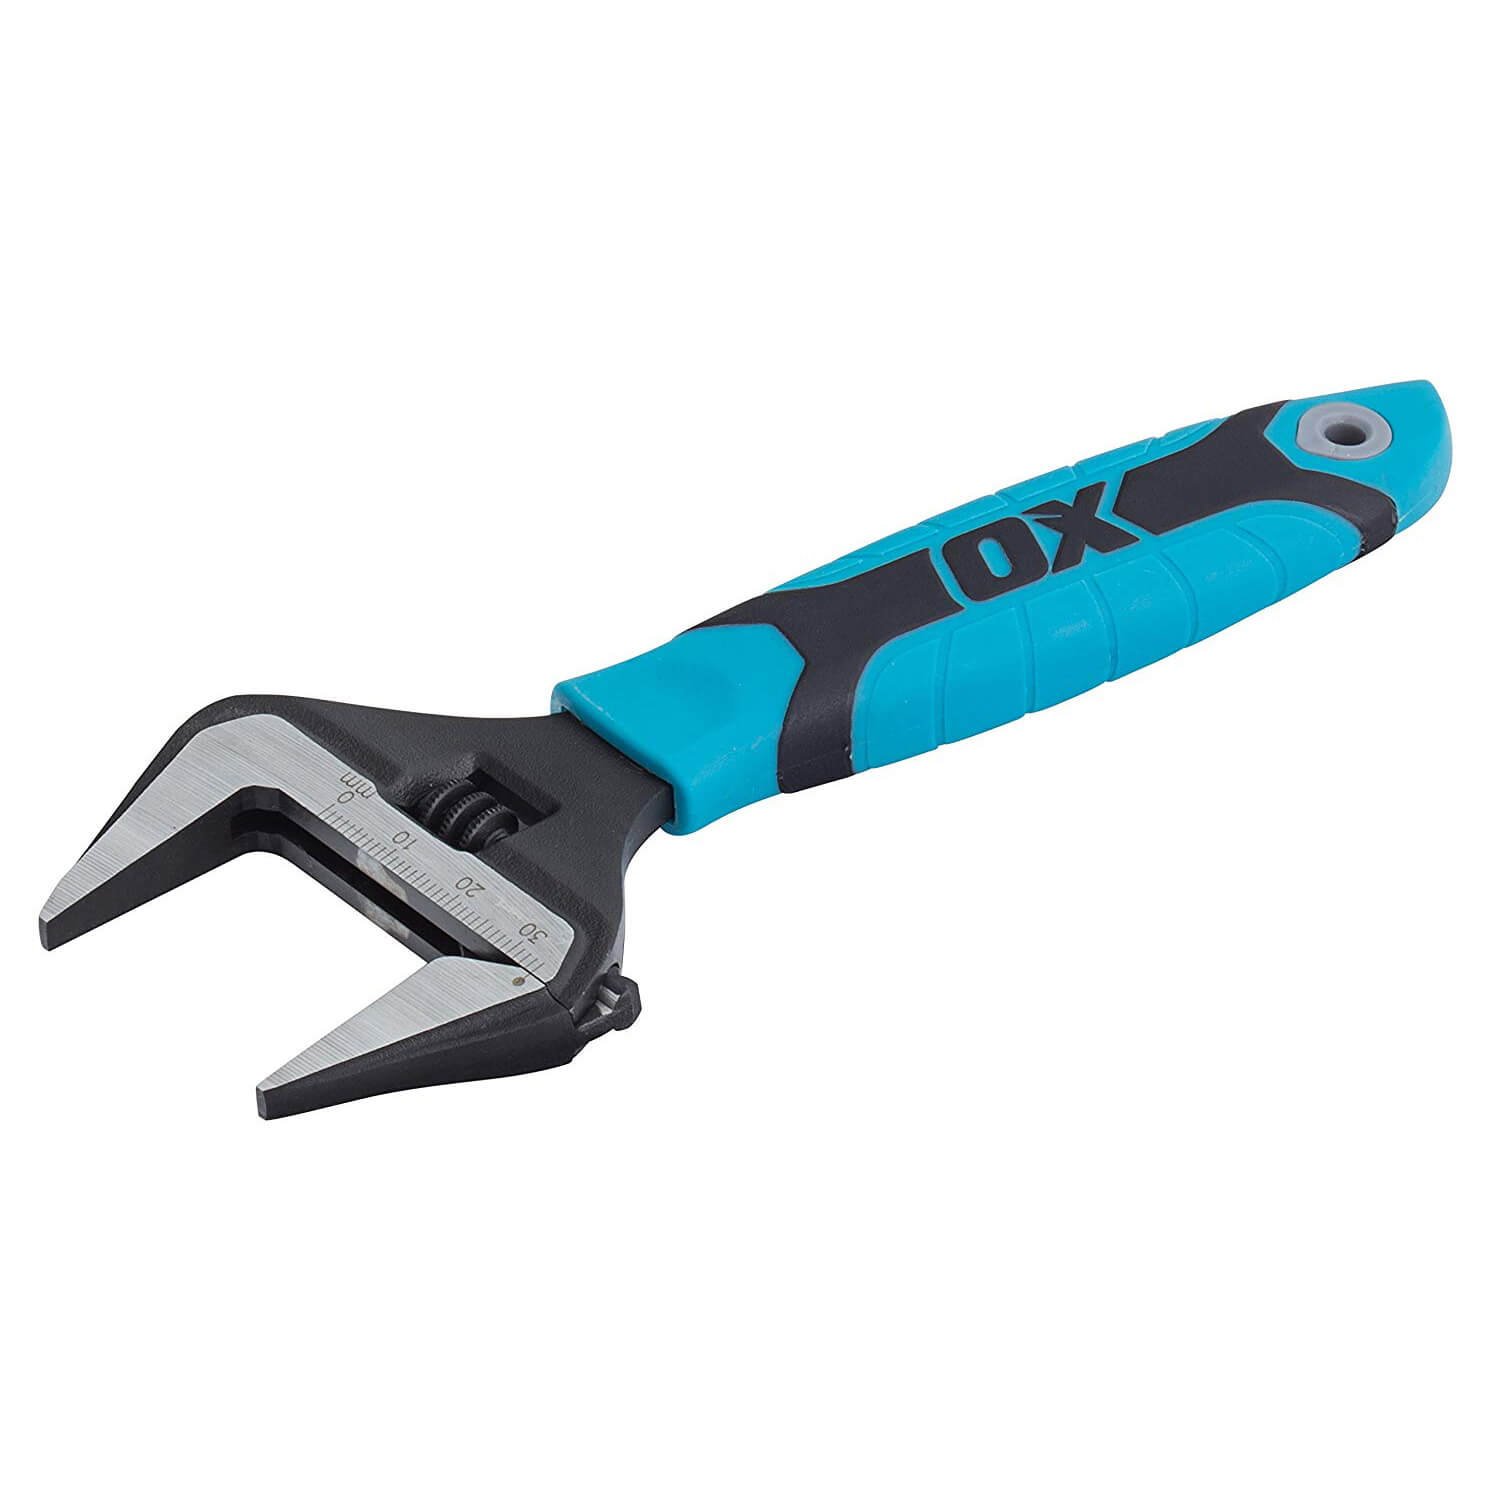 Useful Jaw Width Capacity: 24MM Adjustable Spanner 4 115MM Lightweight Wrench Compact Soft Grip Wide Jaw Hand Tool Blue Short 